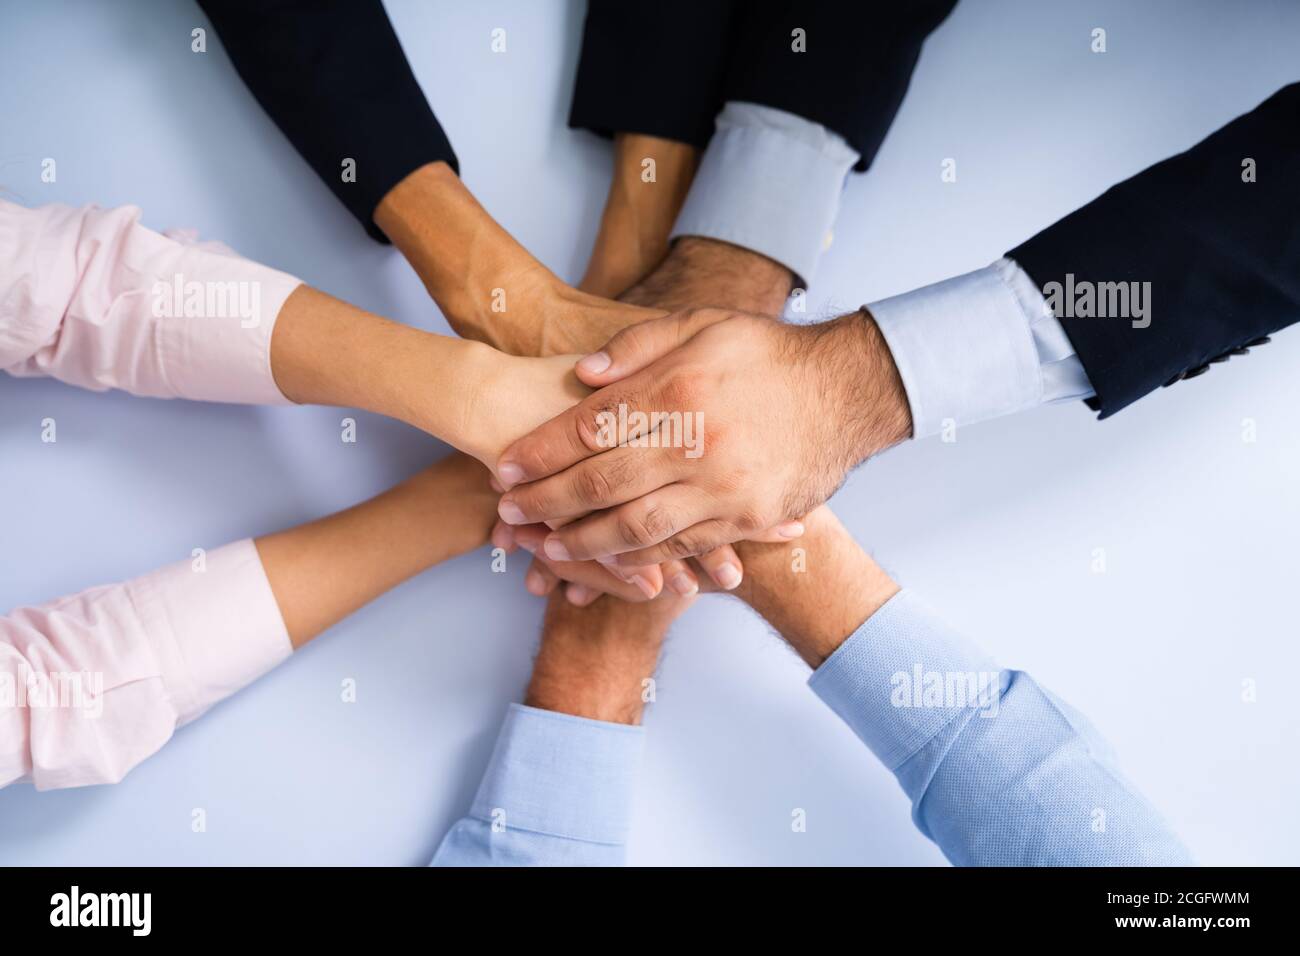 Business People Team Spirit And Employee Huddle Stock Photo